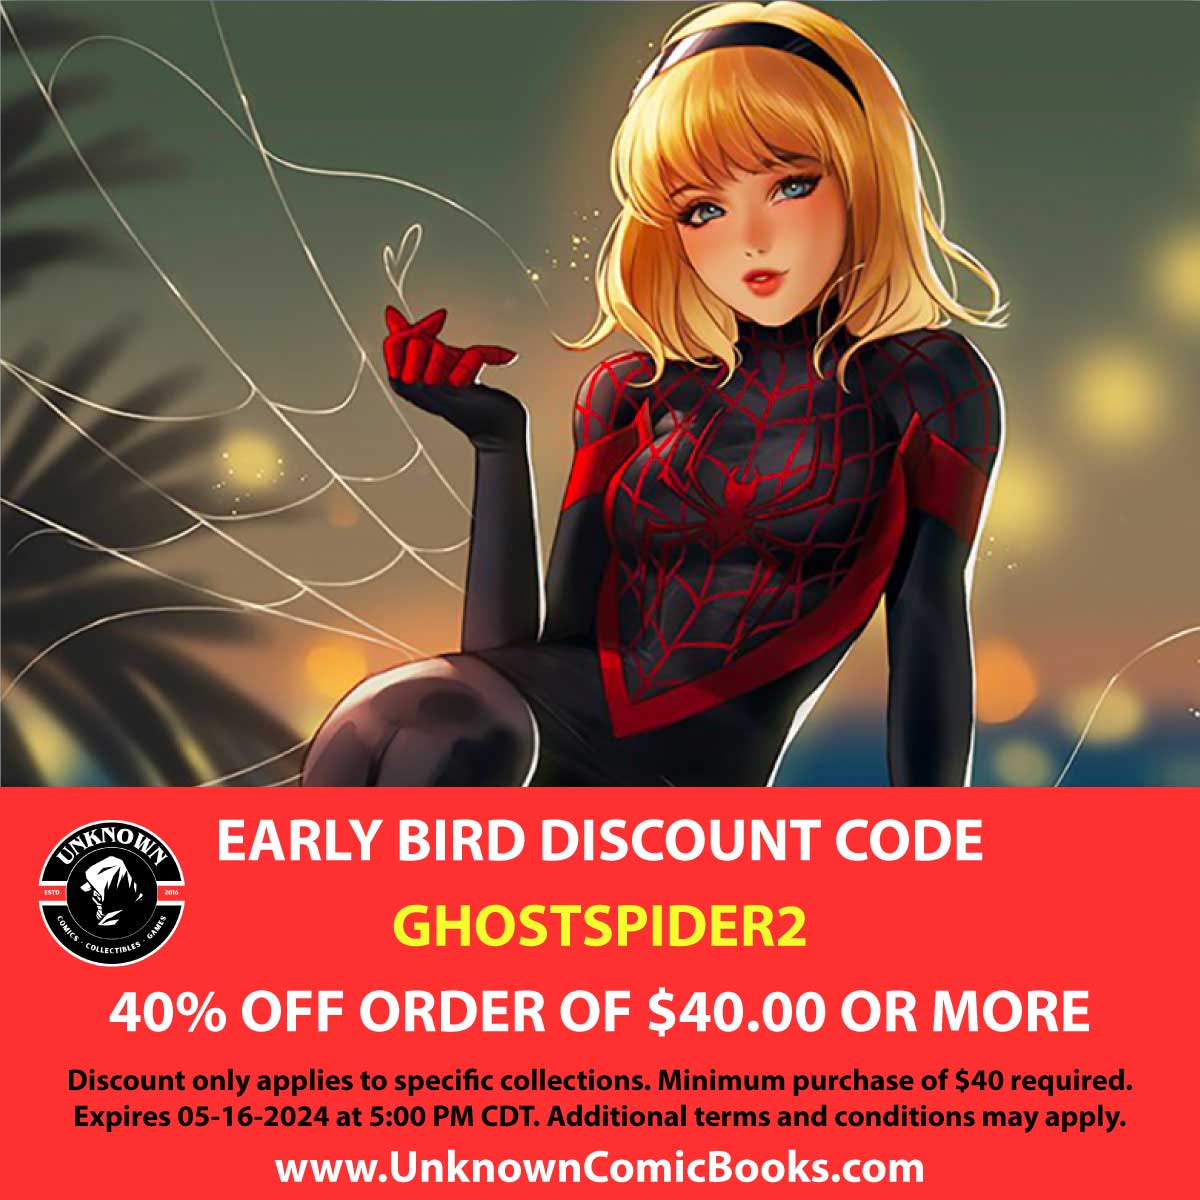 Spider-Gwen's got a new suit & YOU can save 40%!  The exclusive Spider-Gwen Ghost-Spider #2 by Leirix is NOW LIVE! Use code GHOSTSPIDER2 for 40% off exclusives over $40 (expires 5/16 5PM CST)! UnknownComicBooks.com #SpiderGwen #ExclusiveCover  #UnknownComics